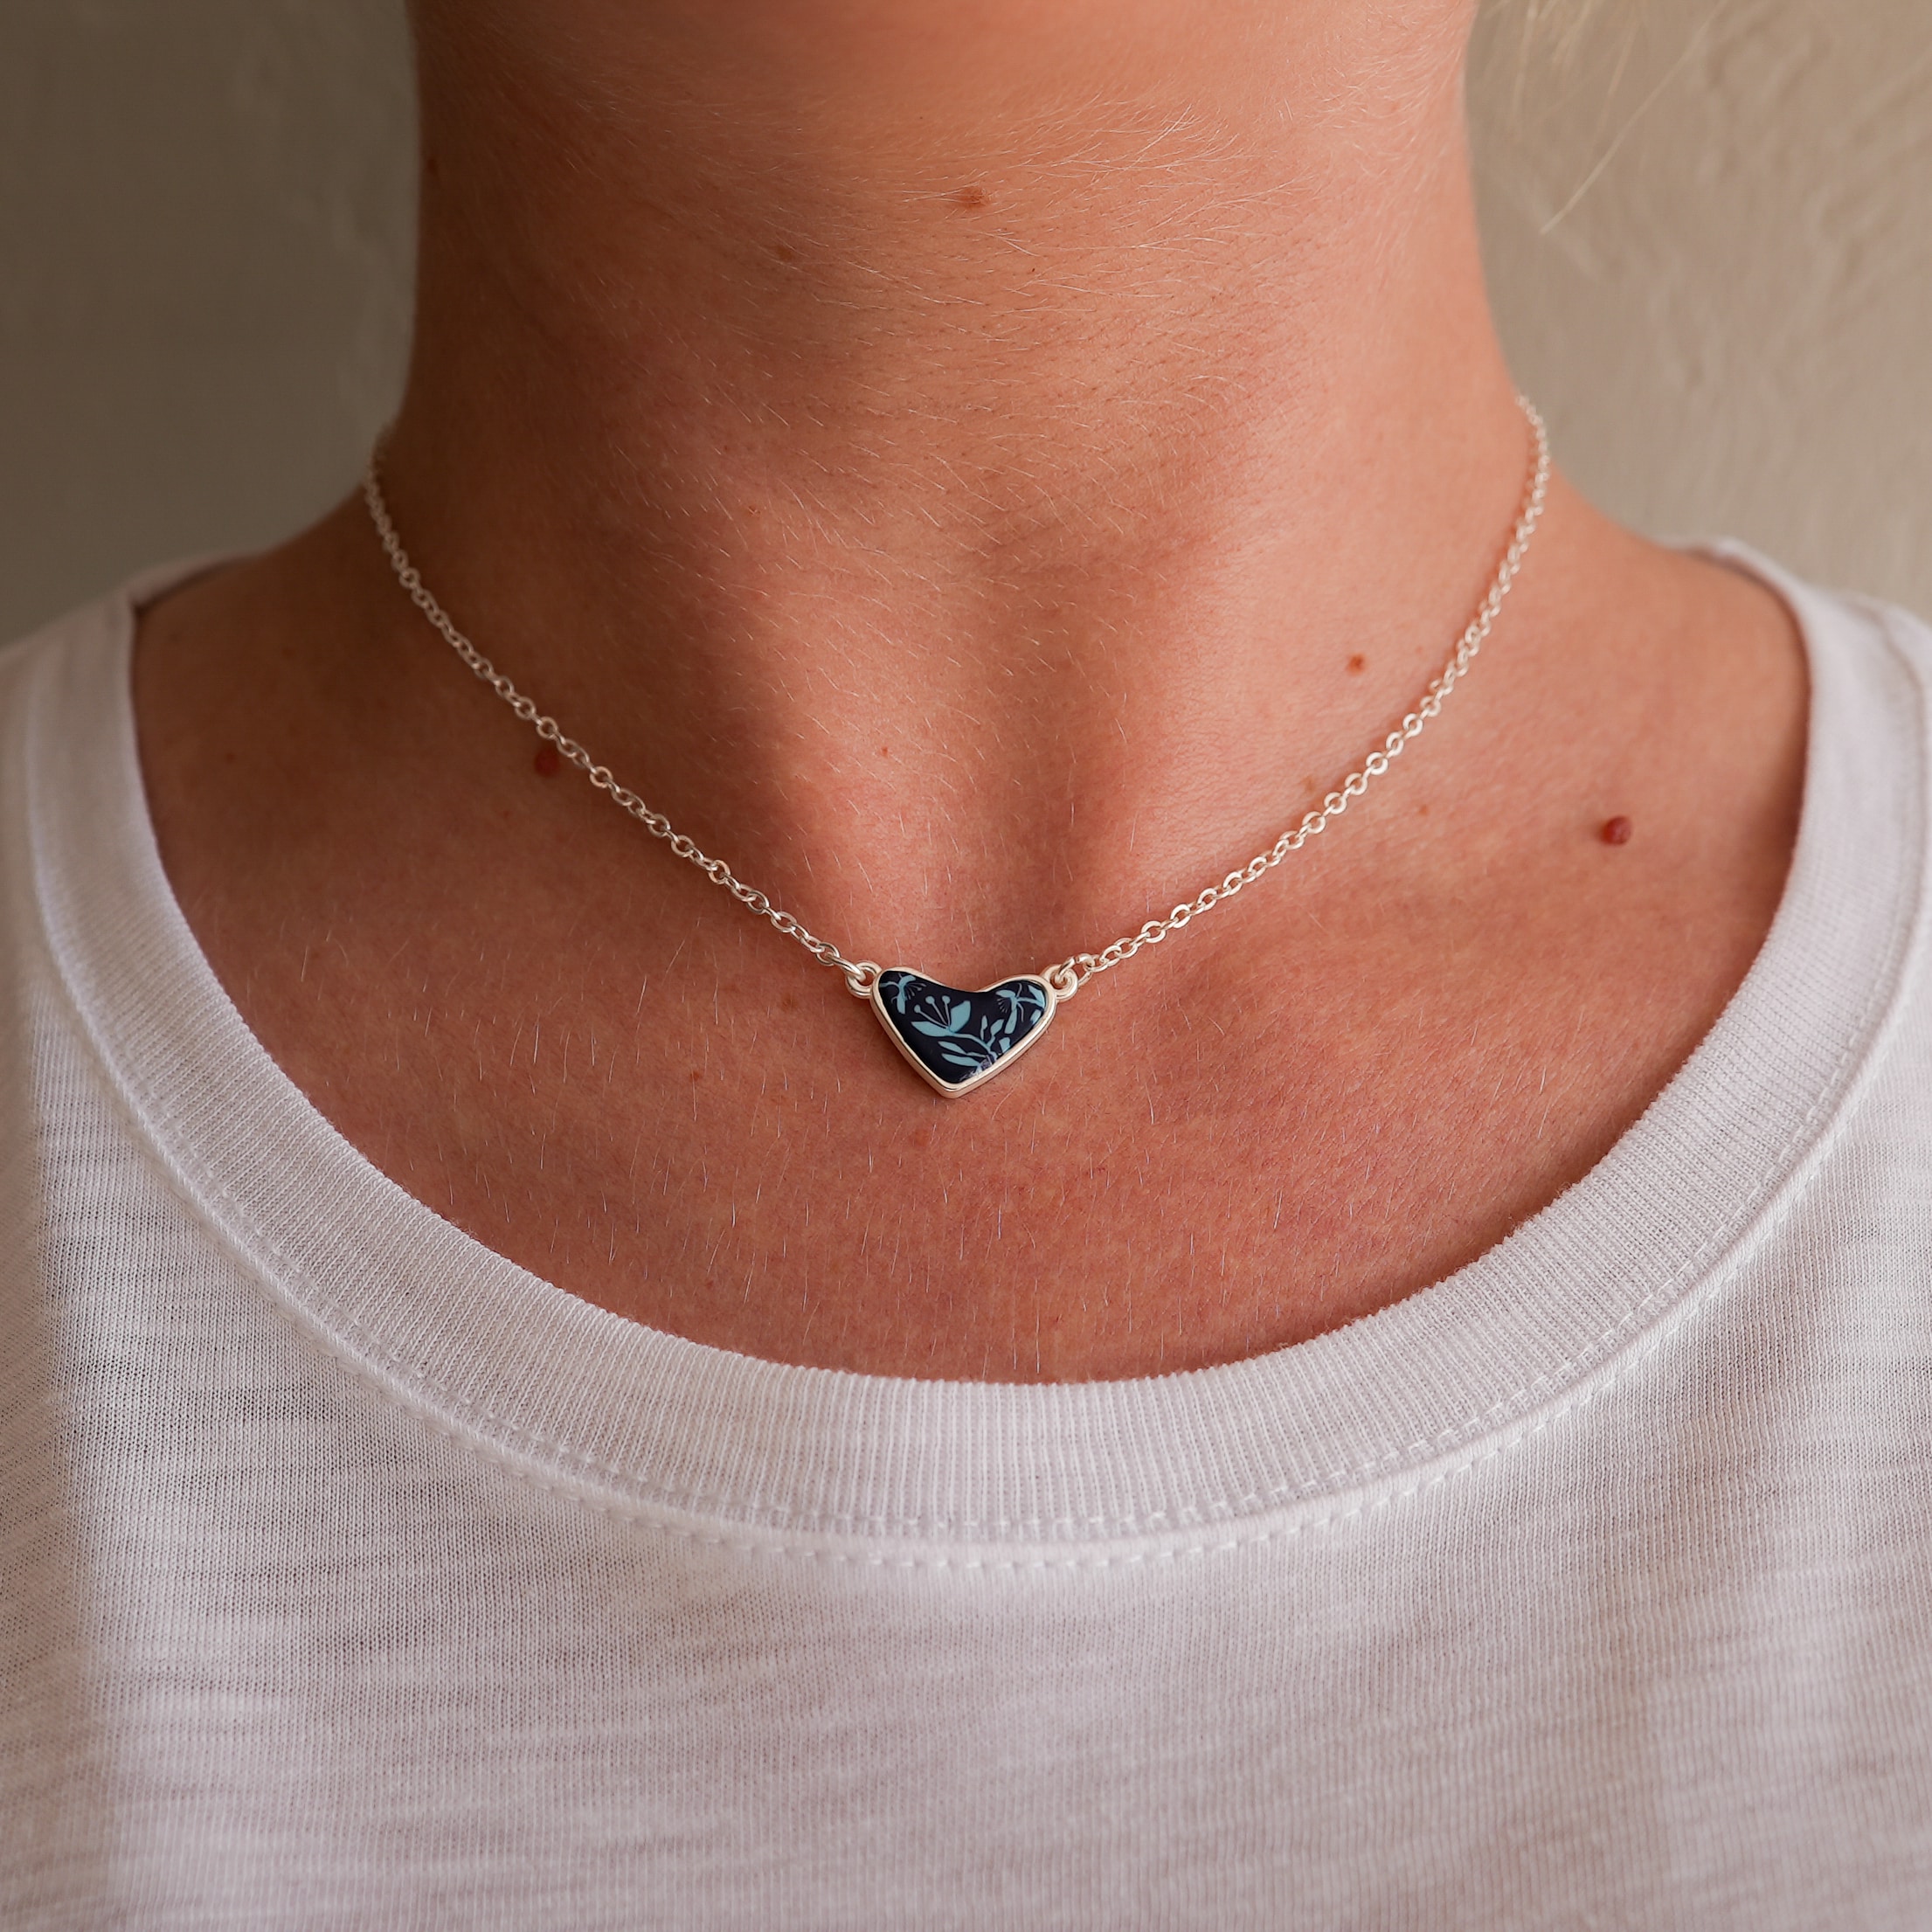 People We Love Necklace: Grandmother image